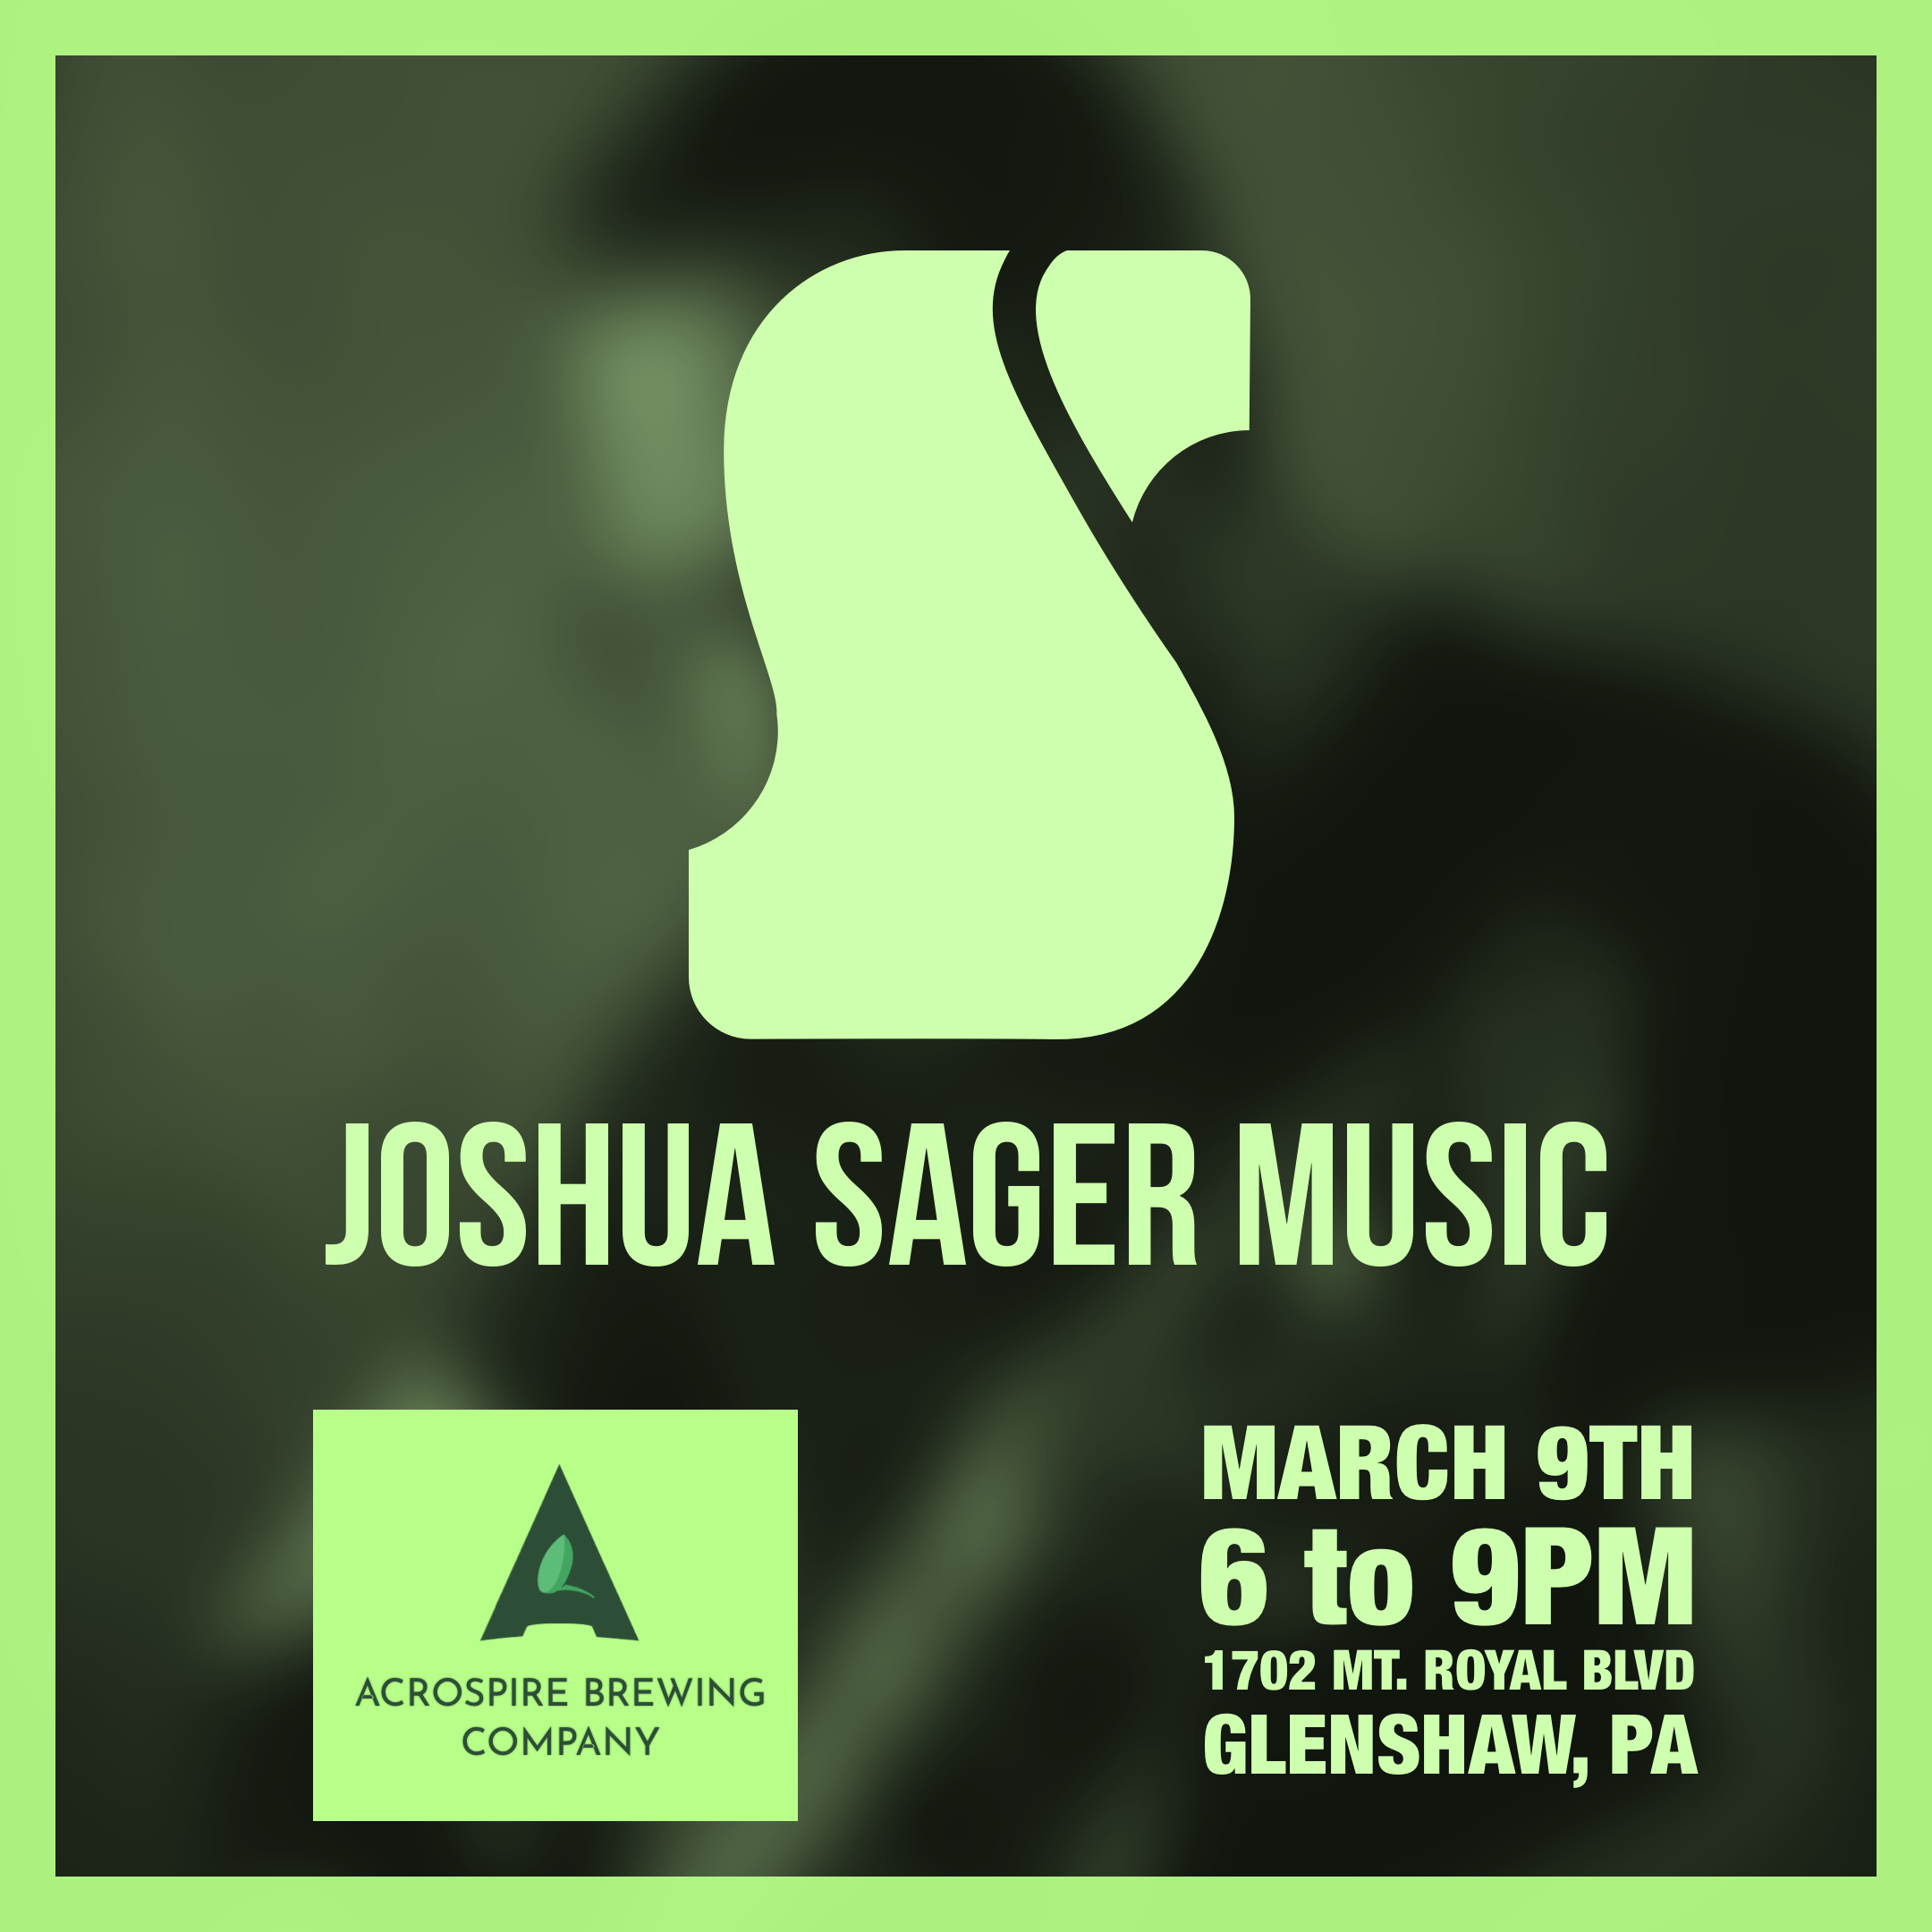 Joshua Sager will be performing at Acrospire Brewing on March 9th from 6pm - 9pm